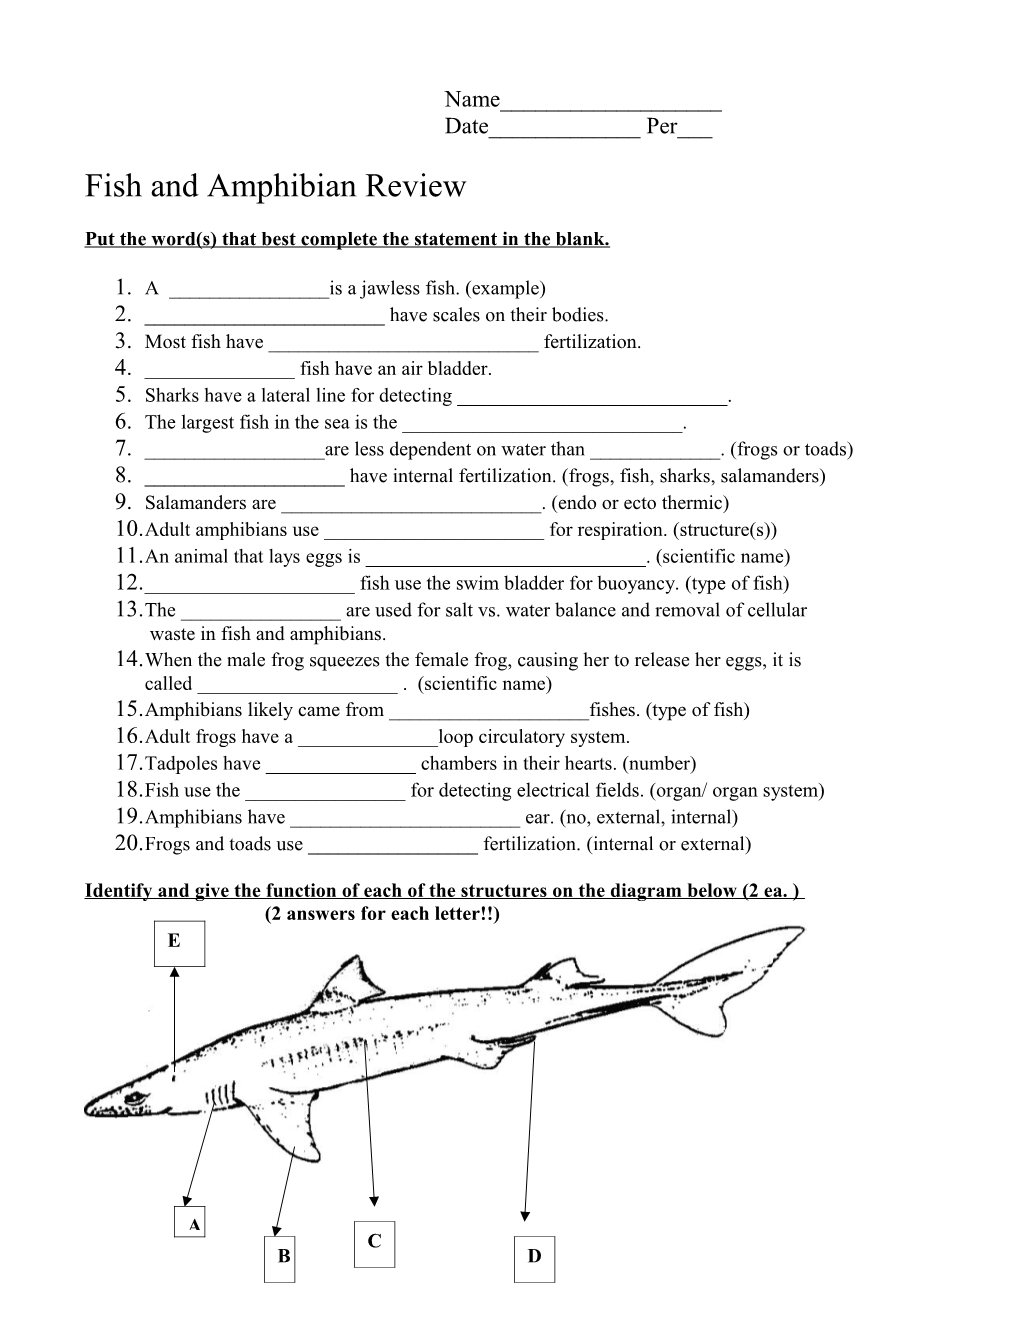 Fish and Amphibian Review